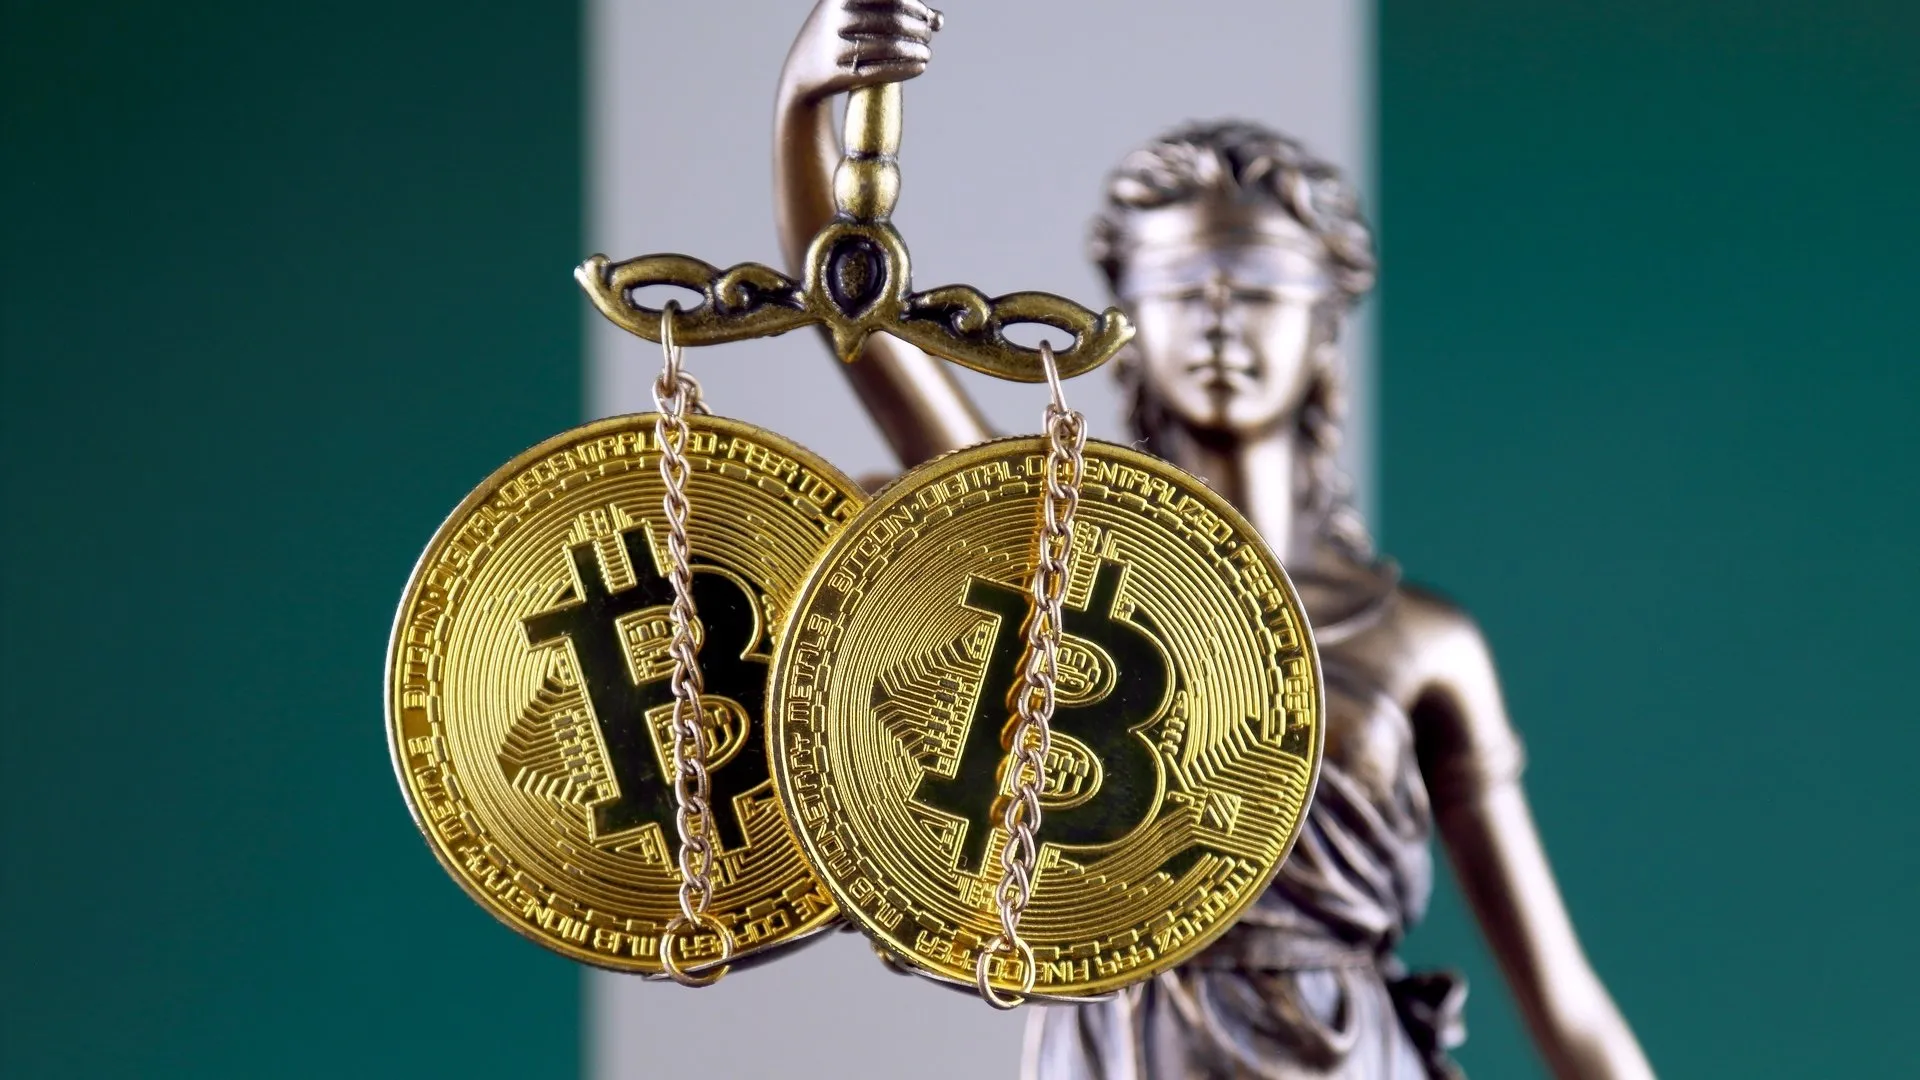 Nigeria is cracking down on crypto. Image: Shutterstock